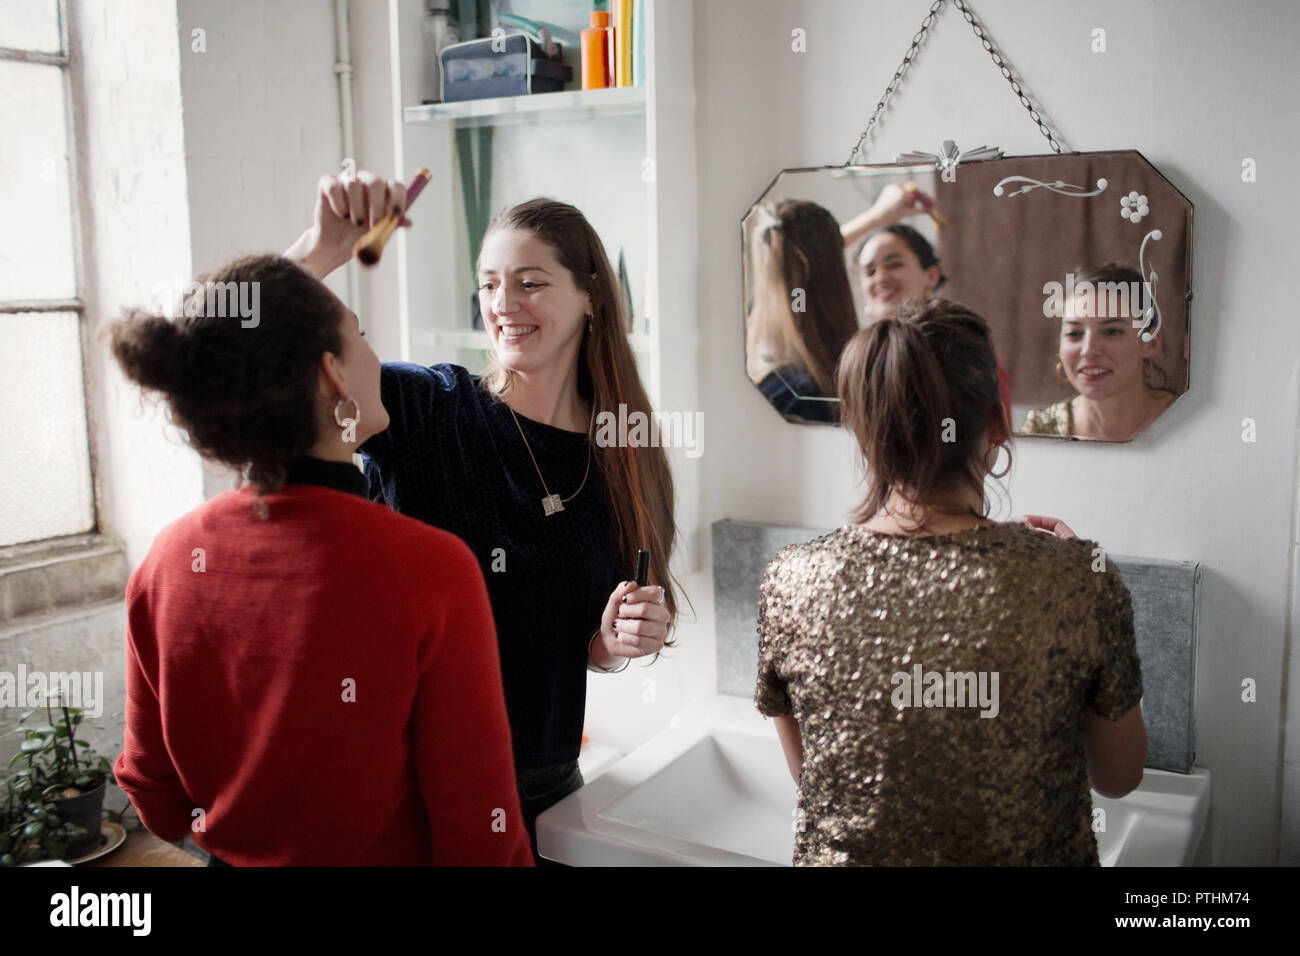 Young women friends getting ready, applying makeup in bathroom Stock Photo